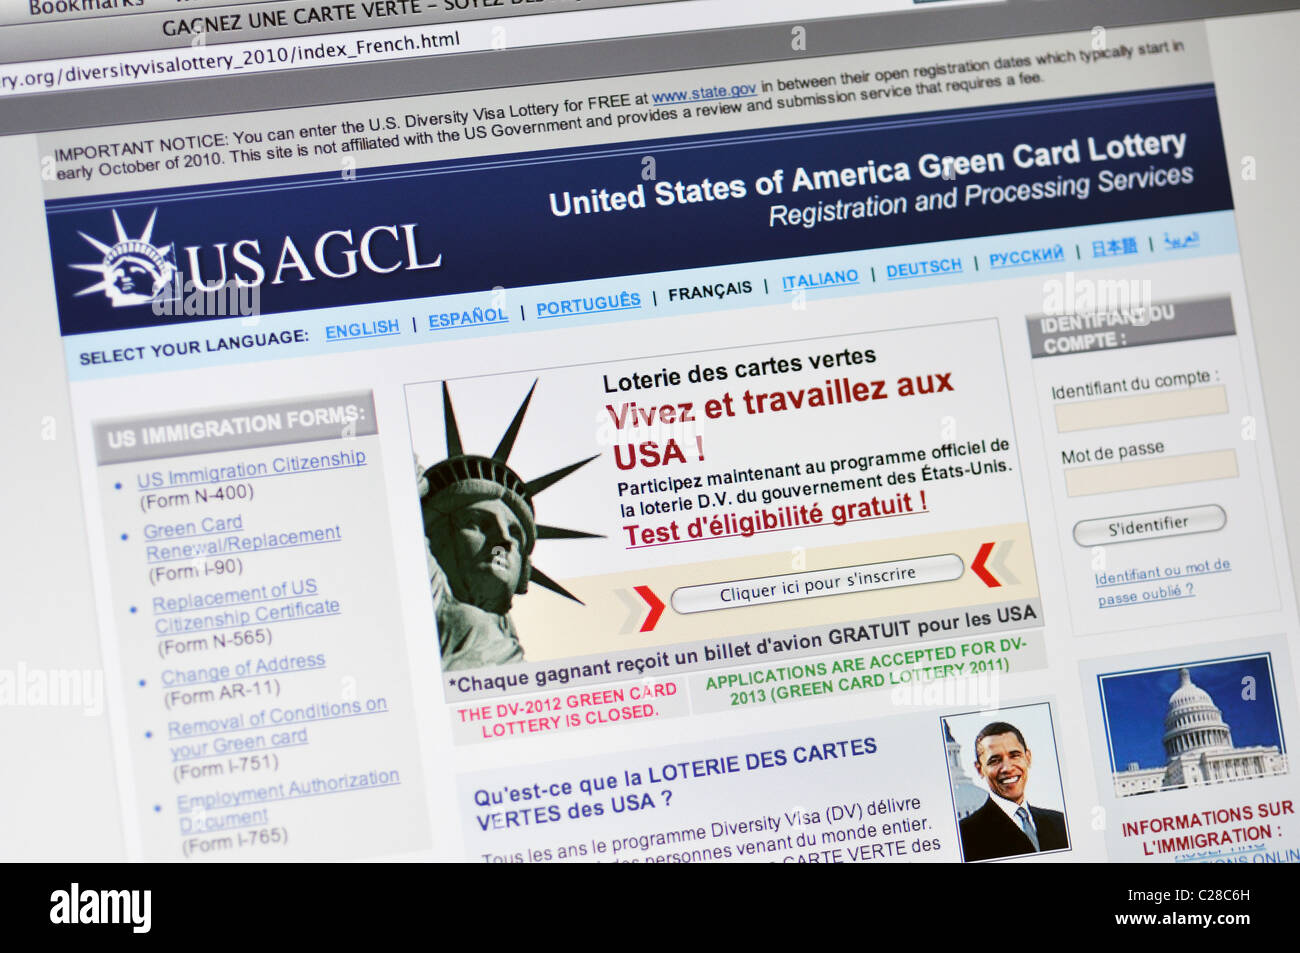 USAGCL website - United States of America Green Card Lottery - in French Stock Photo